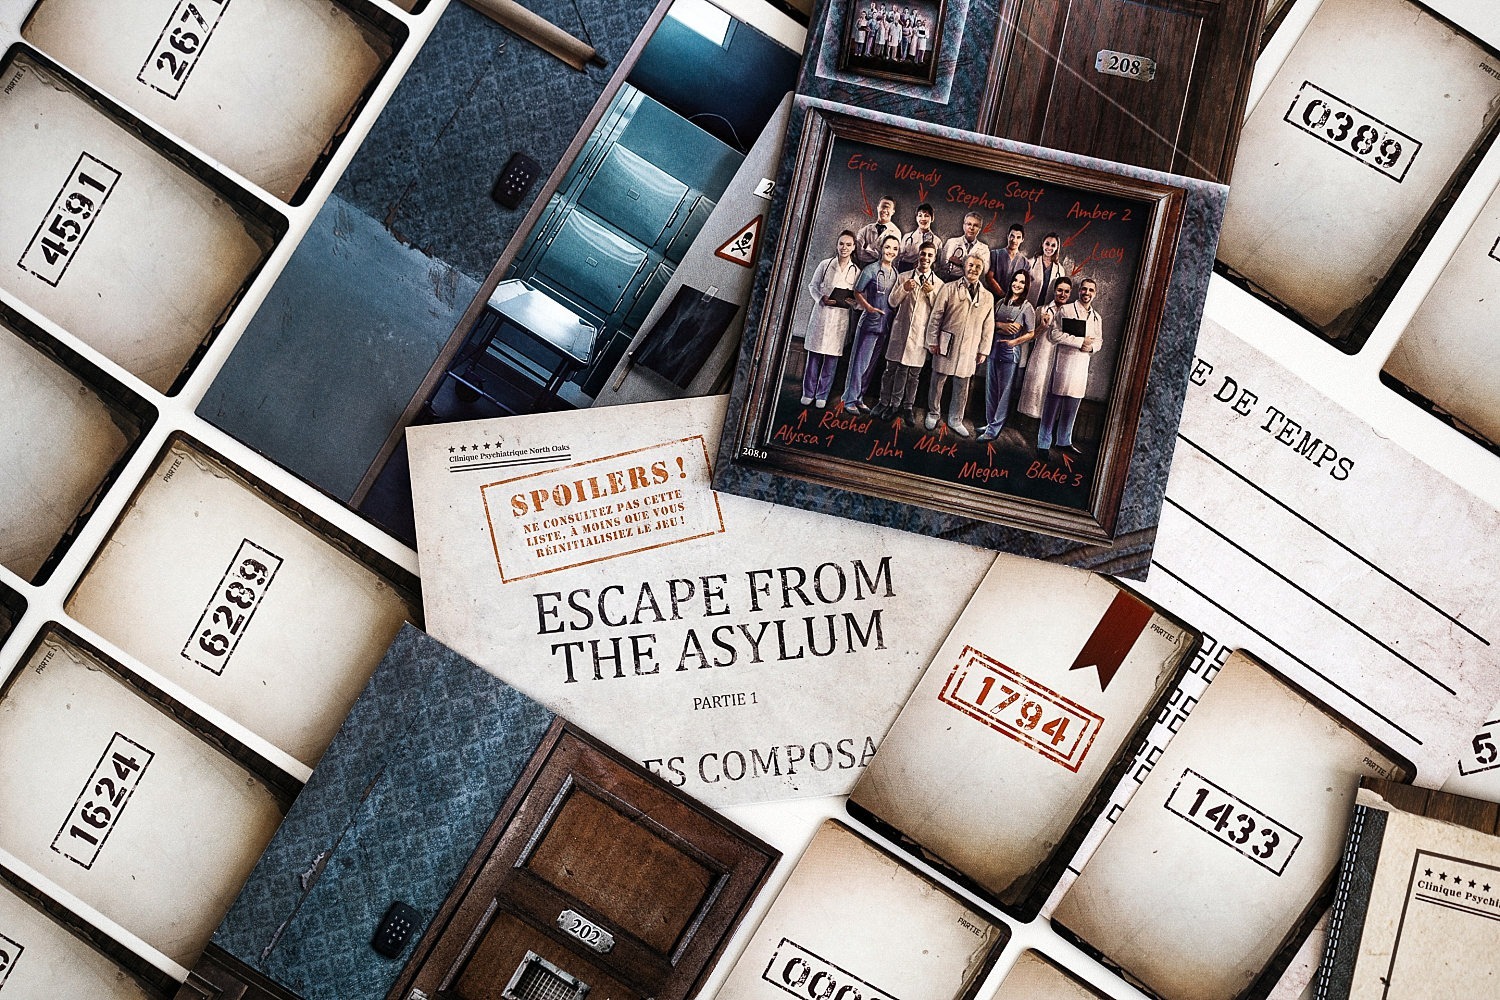 Escape from the asylum 